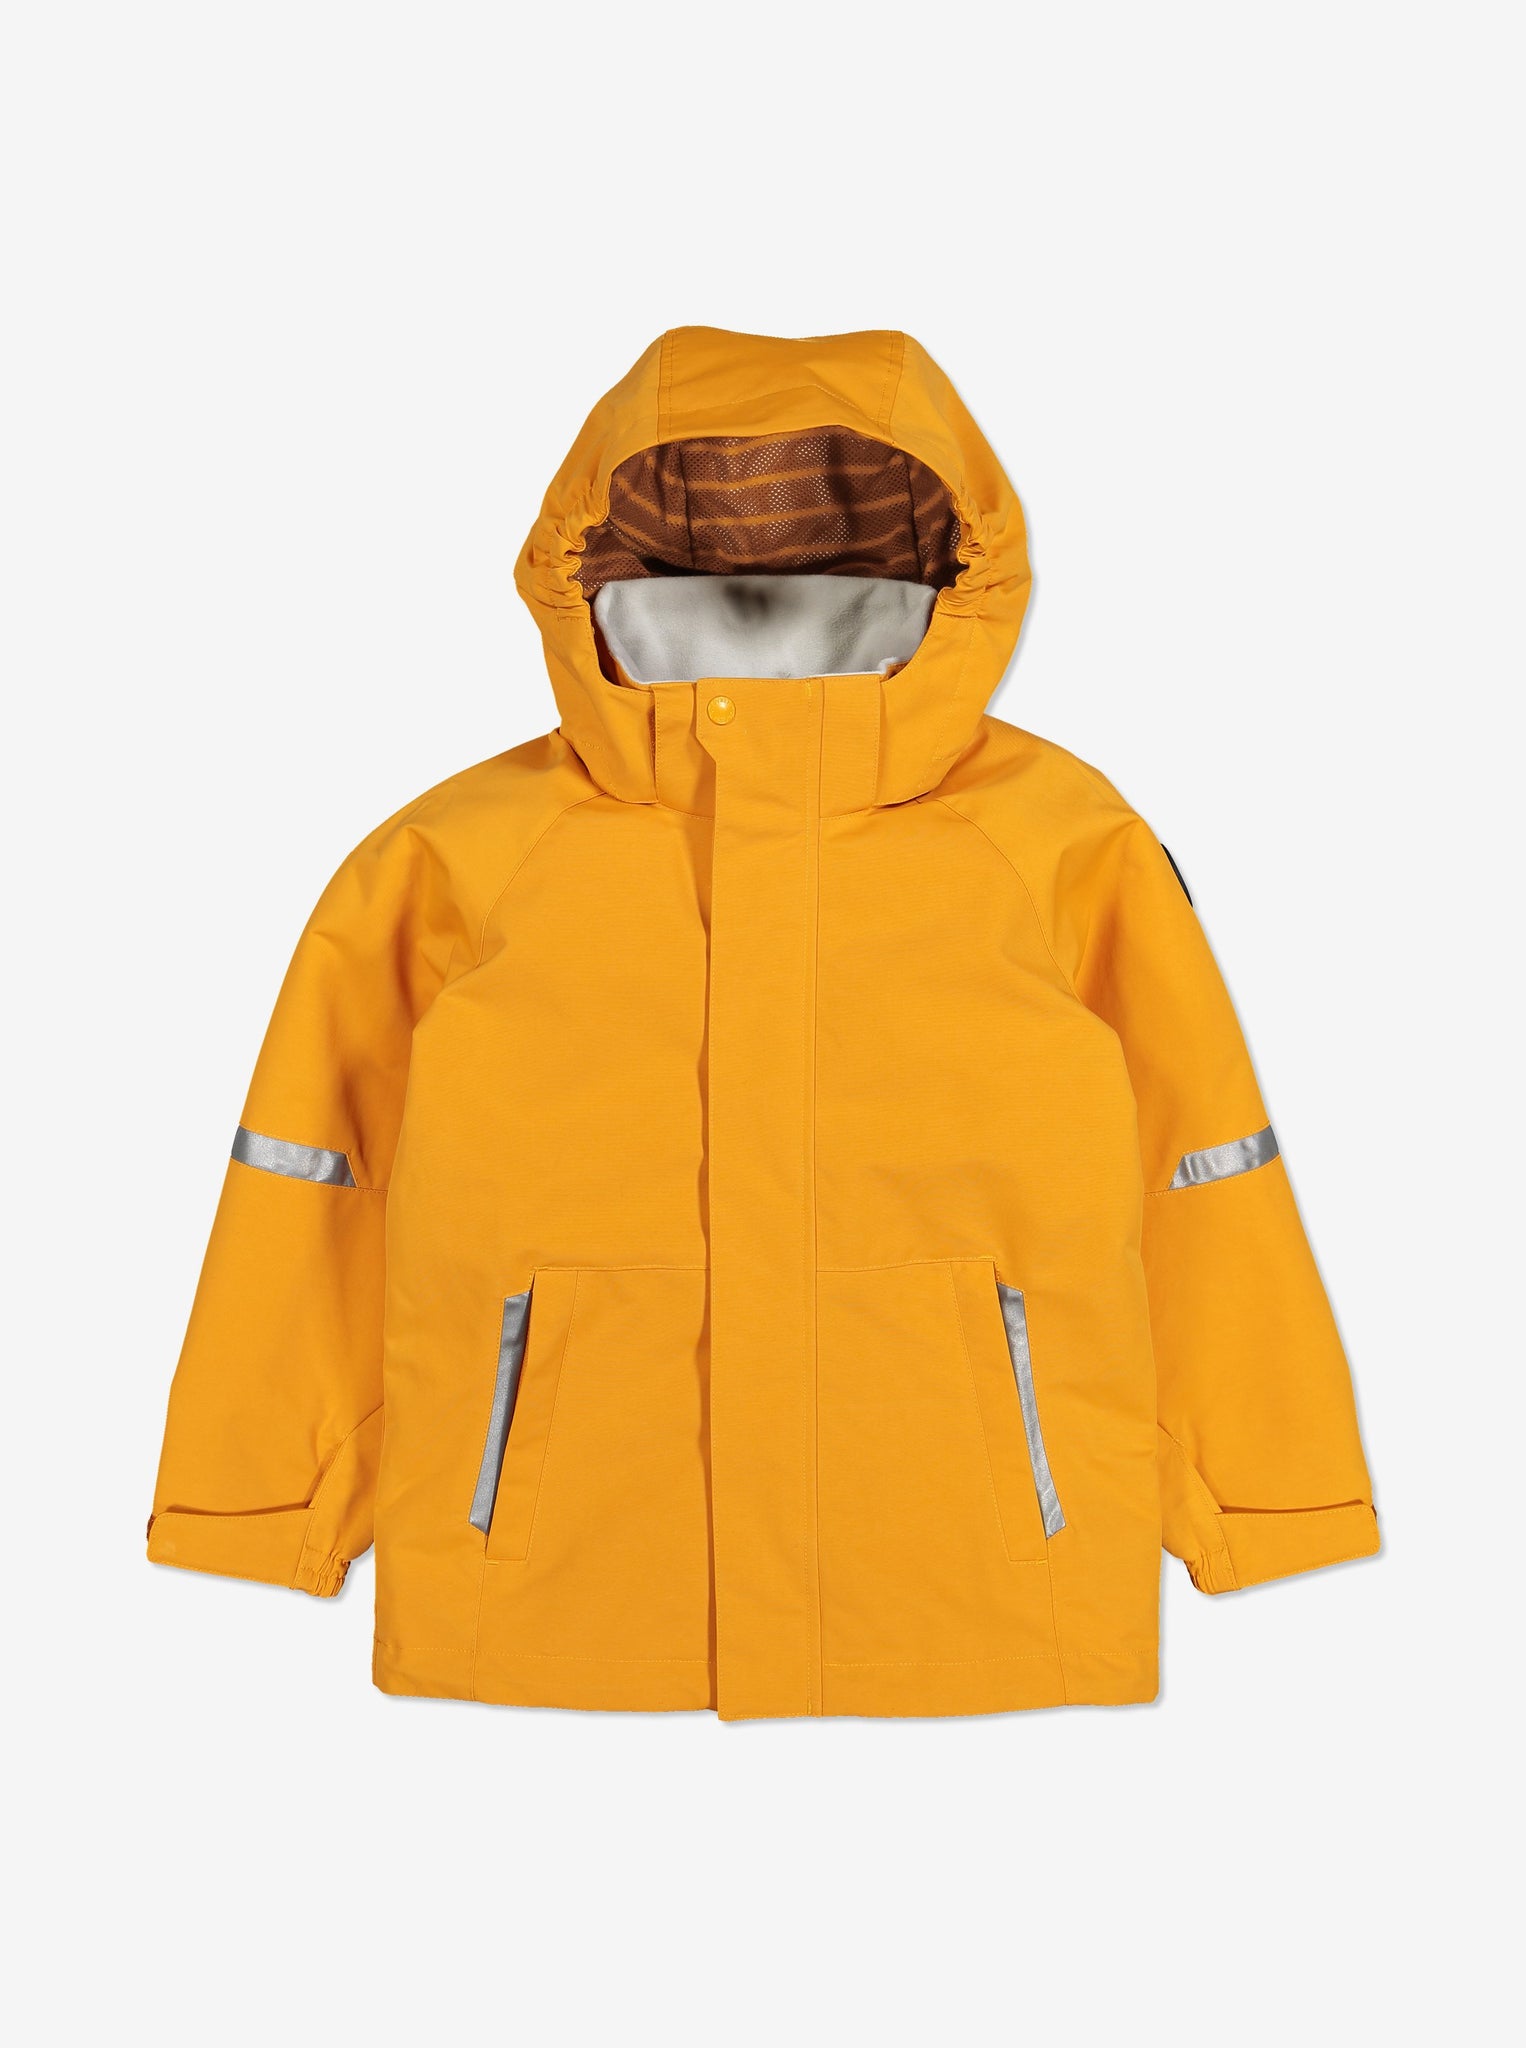 Kids waterproof jacket in yellow, comes with a detachable hood, adjustable cuffs and reflectors, made of soft shell fabric.